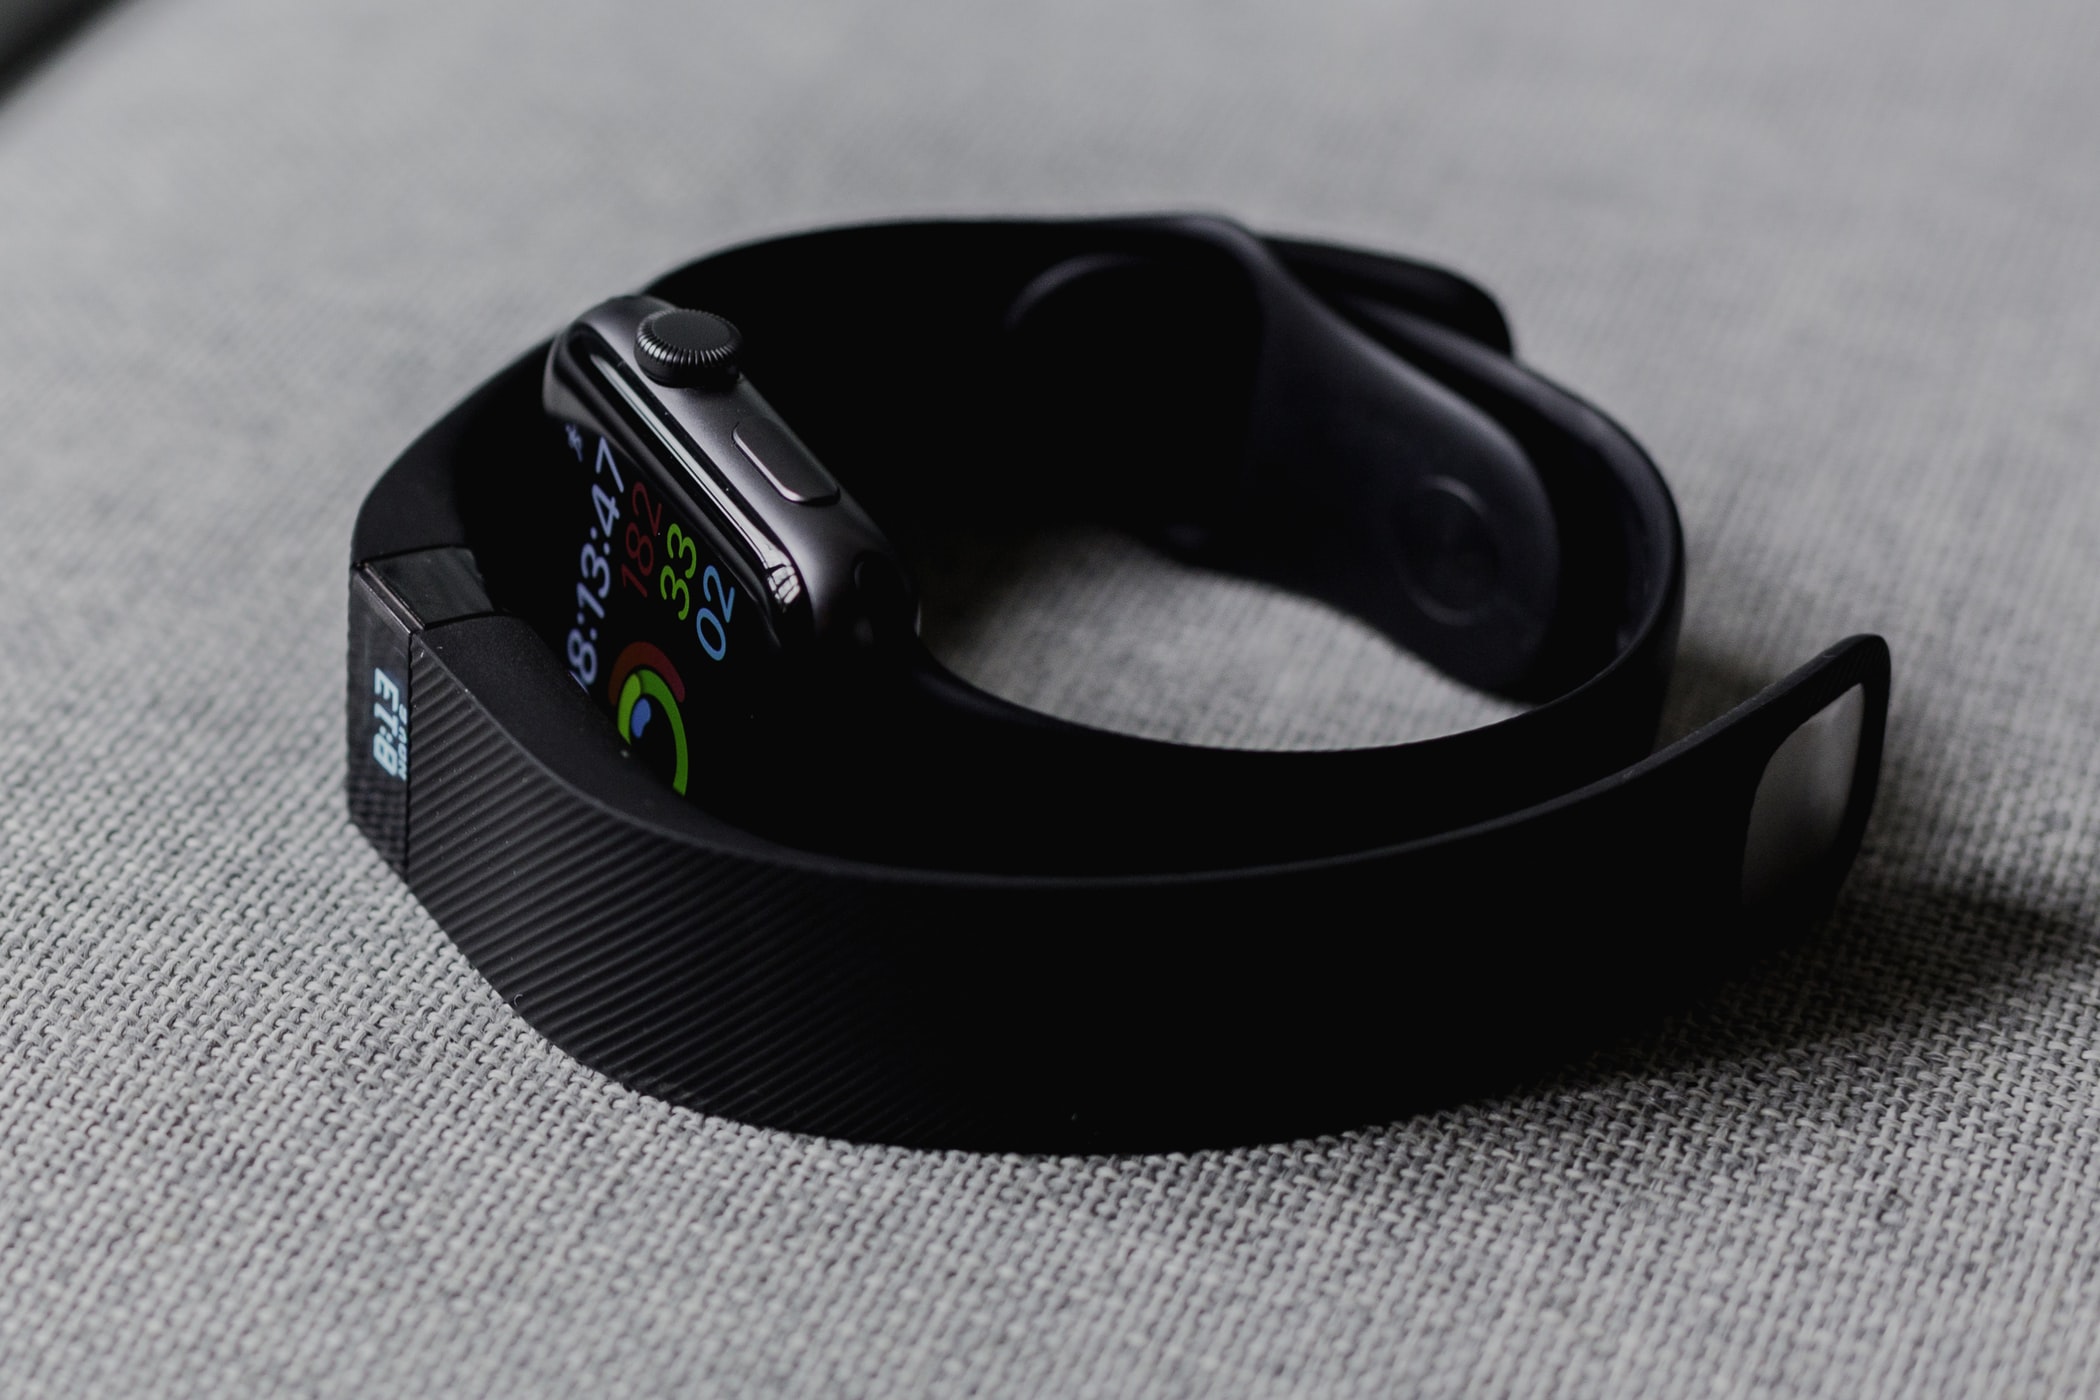 fitbit-stride-setup-a-guide-to-measuring-your-stride-length-on-fitbit